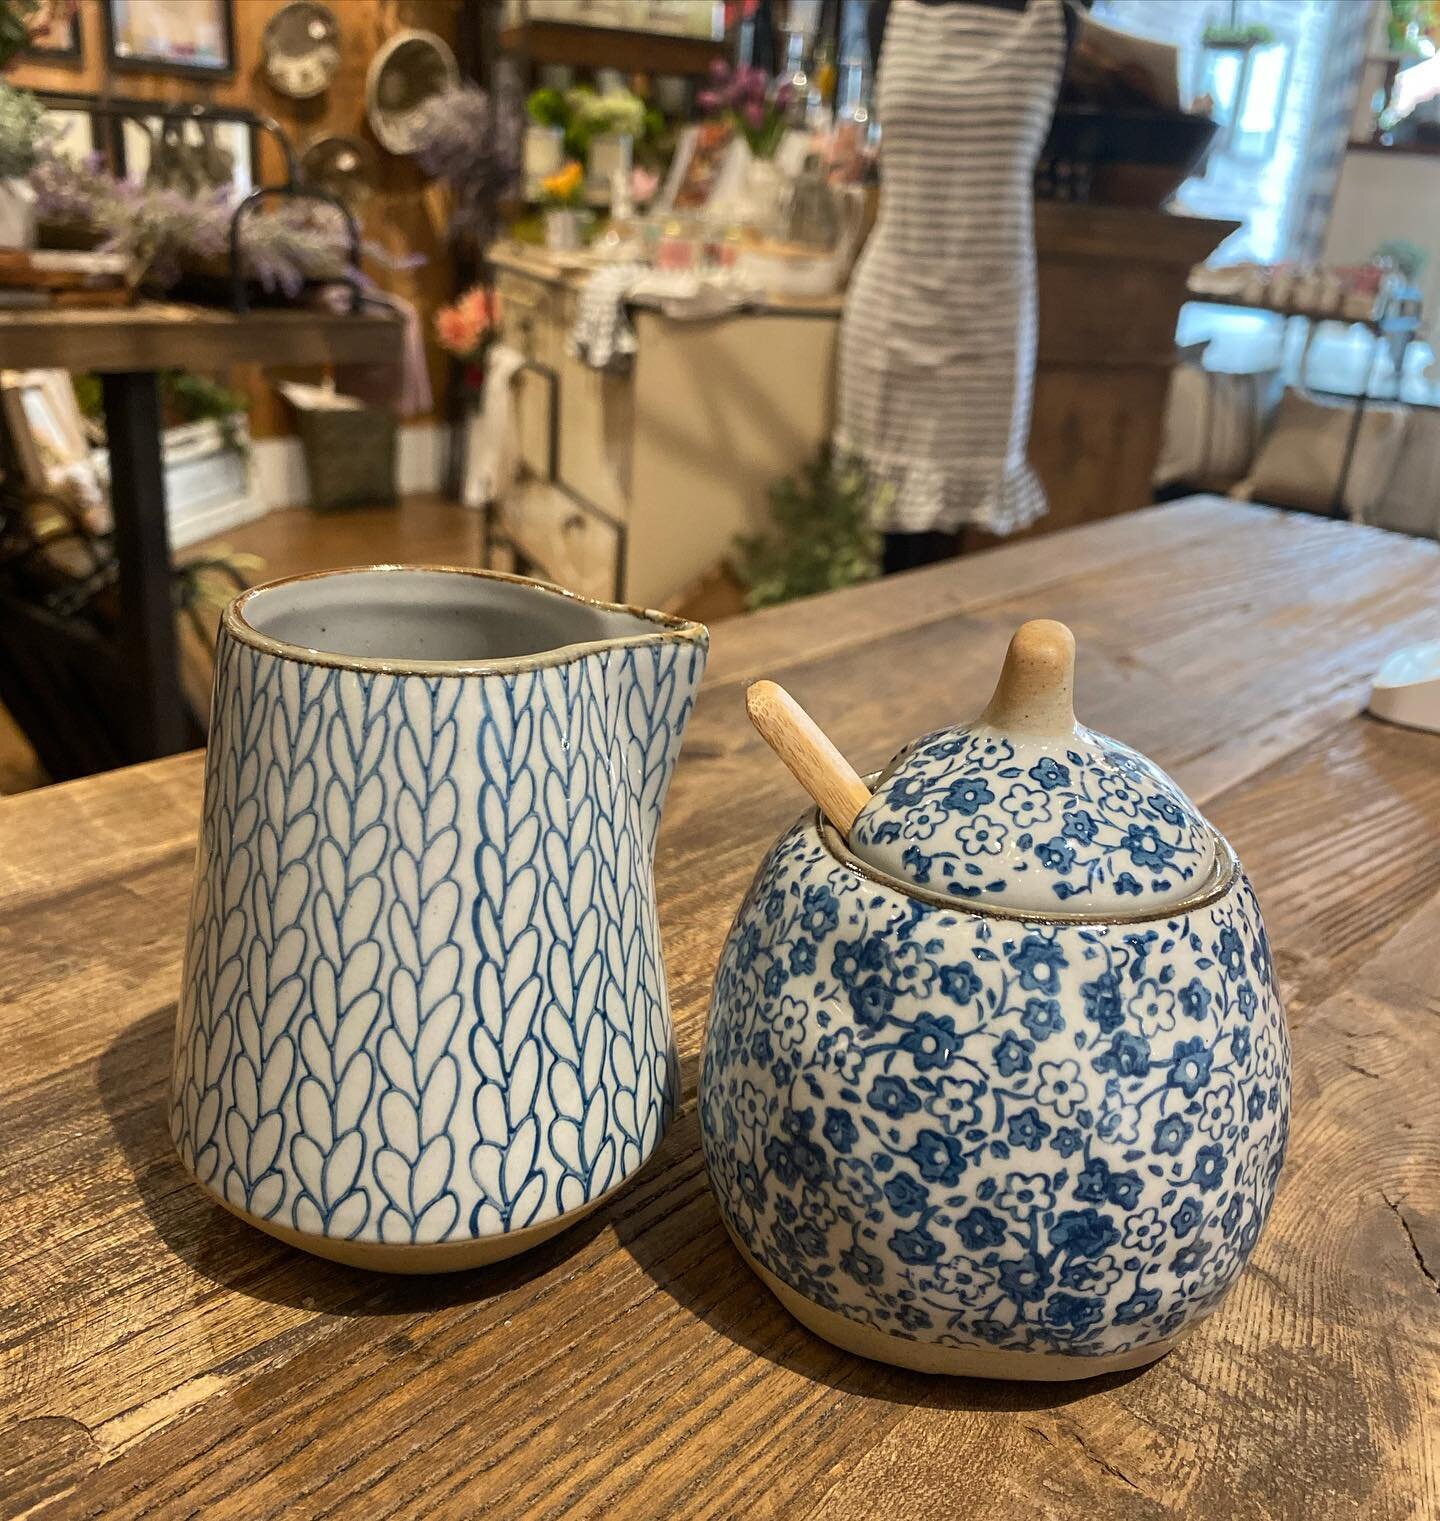 Need a cream &amp; sugar set?

How about this cute set in antique blue. 

Would compliment any coffee station or kitchen.

Here 10-4 today 

#coffeedecor #creamandsugar #splashofcream #pinchofsugar #kitchendecor